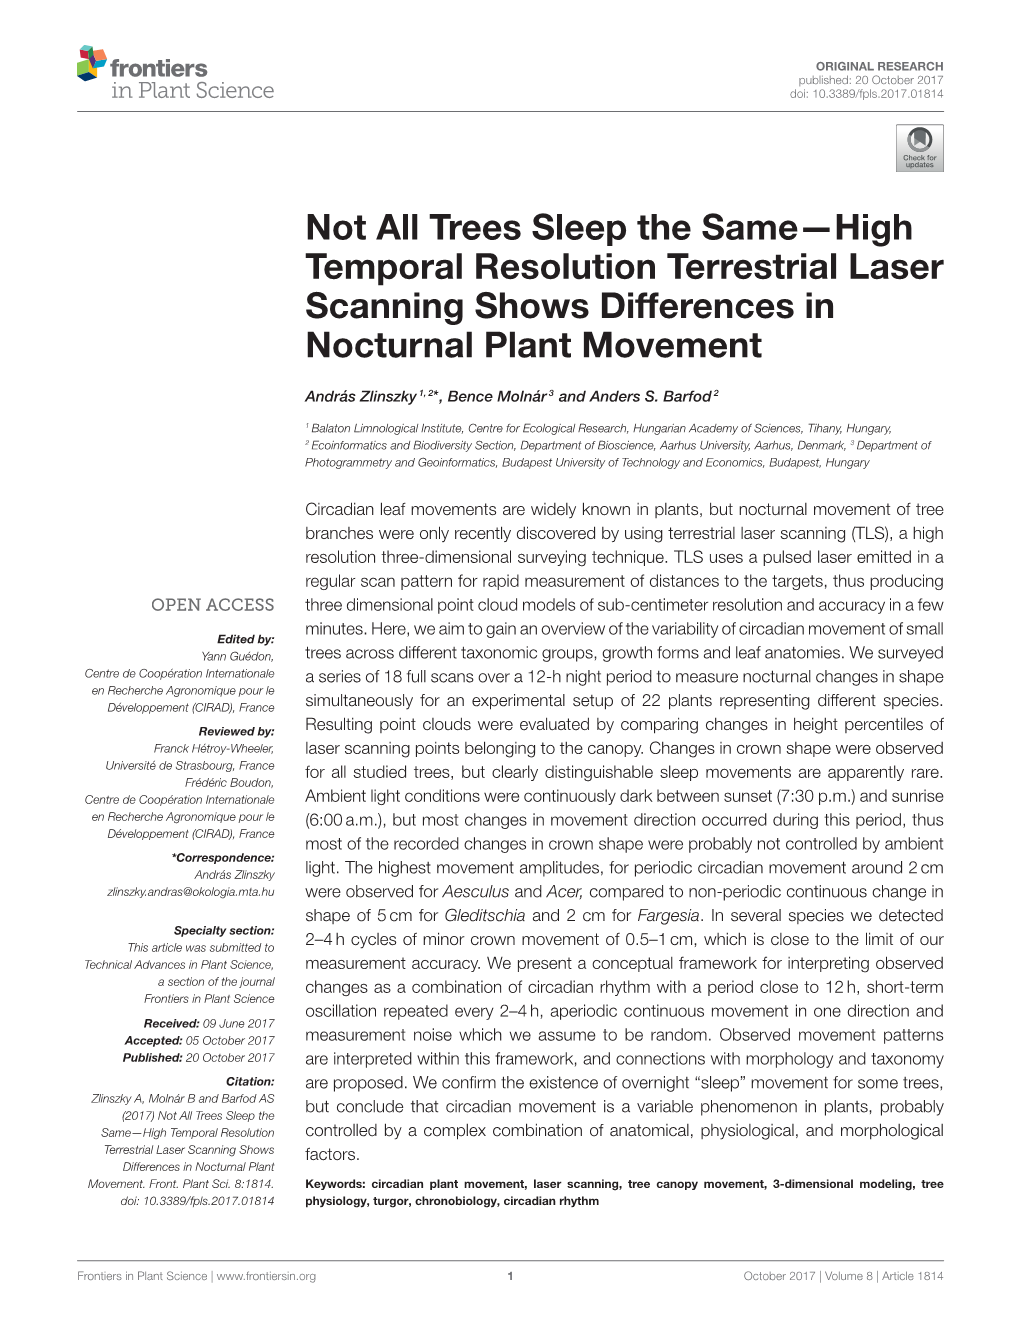 Not All Trees Sleep the Same—High Temporal Resolution Terrestrial Laser Scanning Shows Differences in Nocturnal Plant Movement